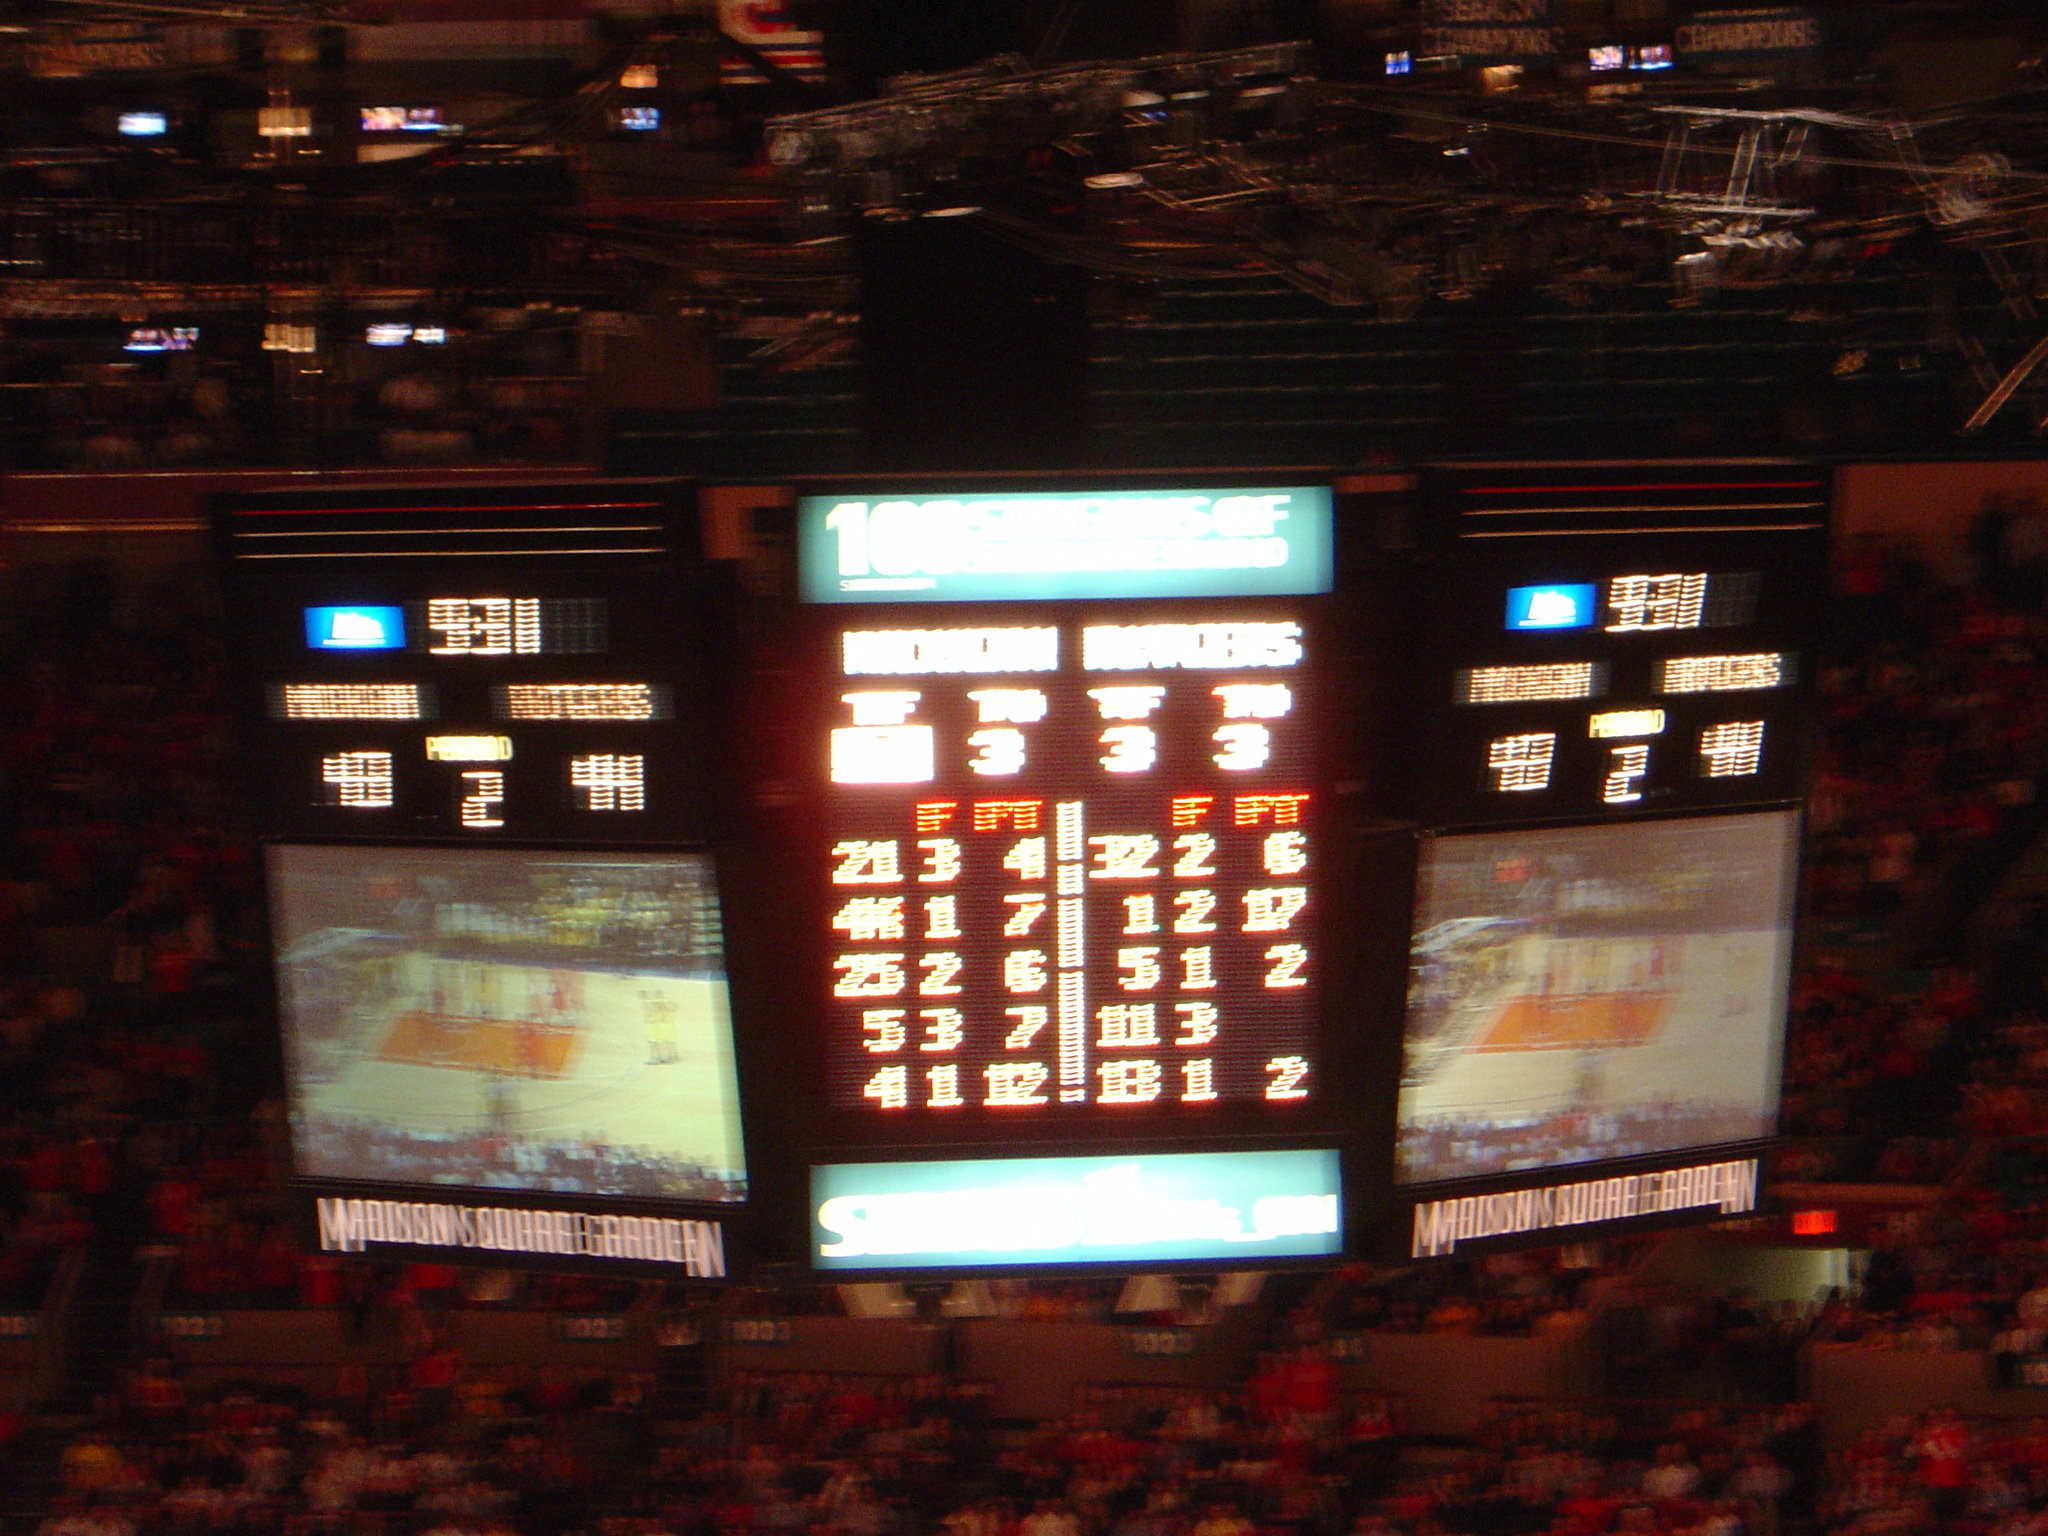 2004 - Rutgers Basketball from Madison Square Garden - Live On WRSU